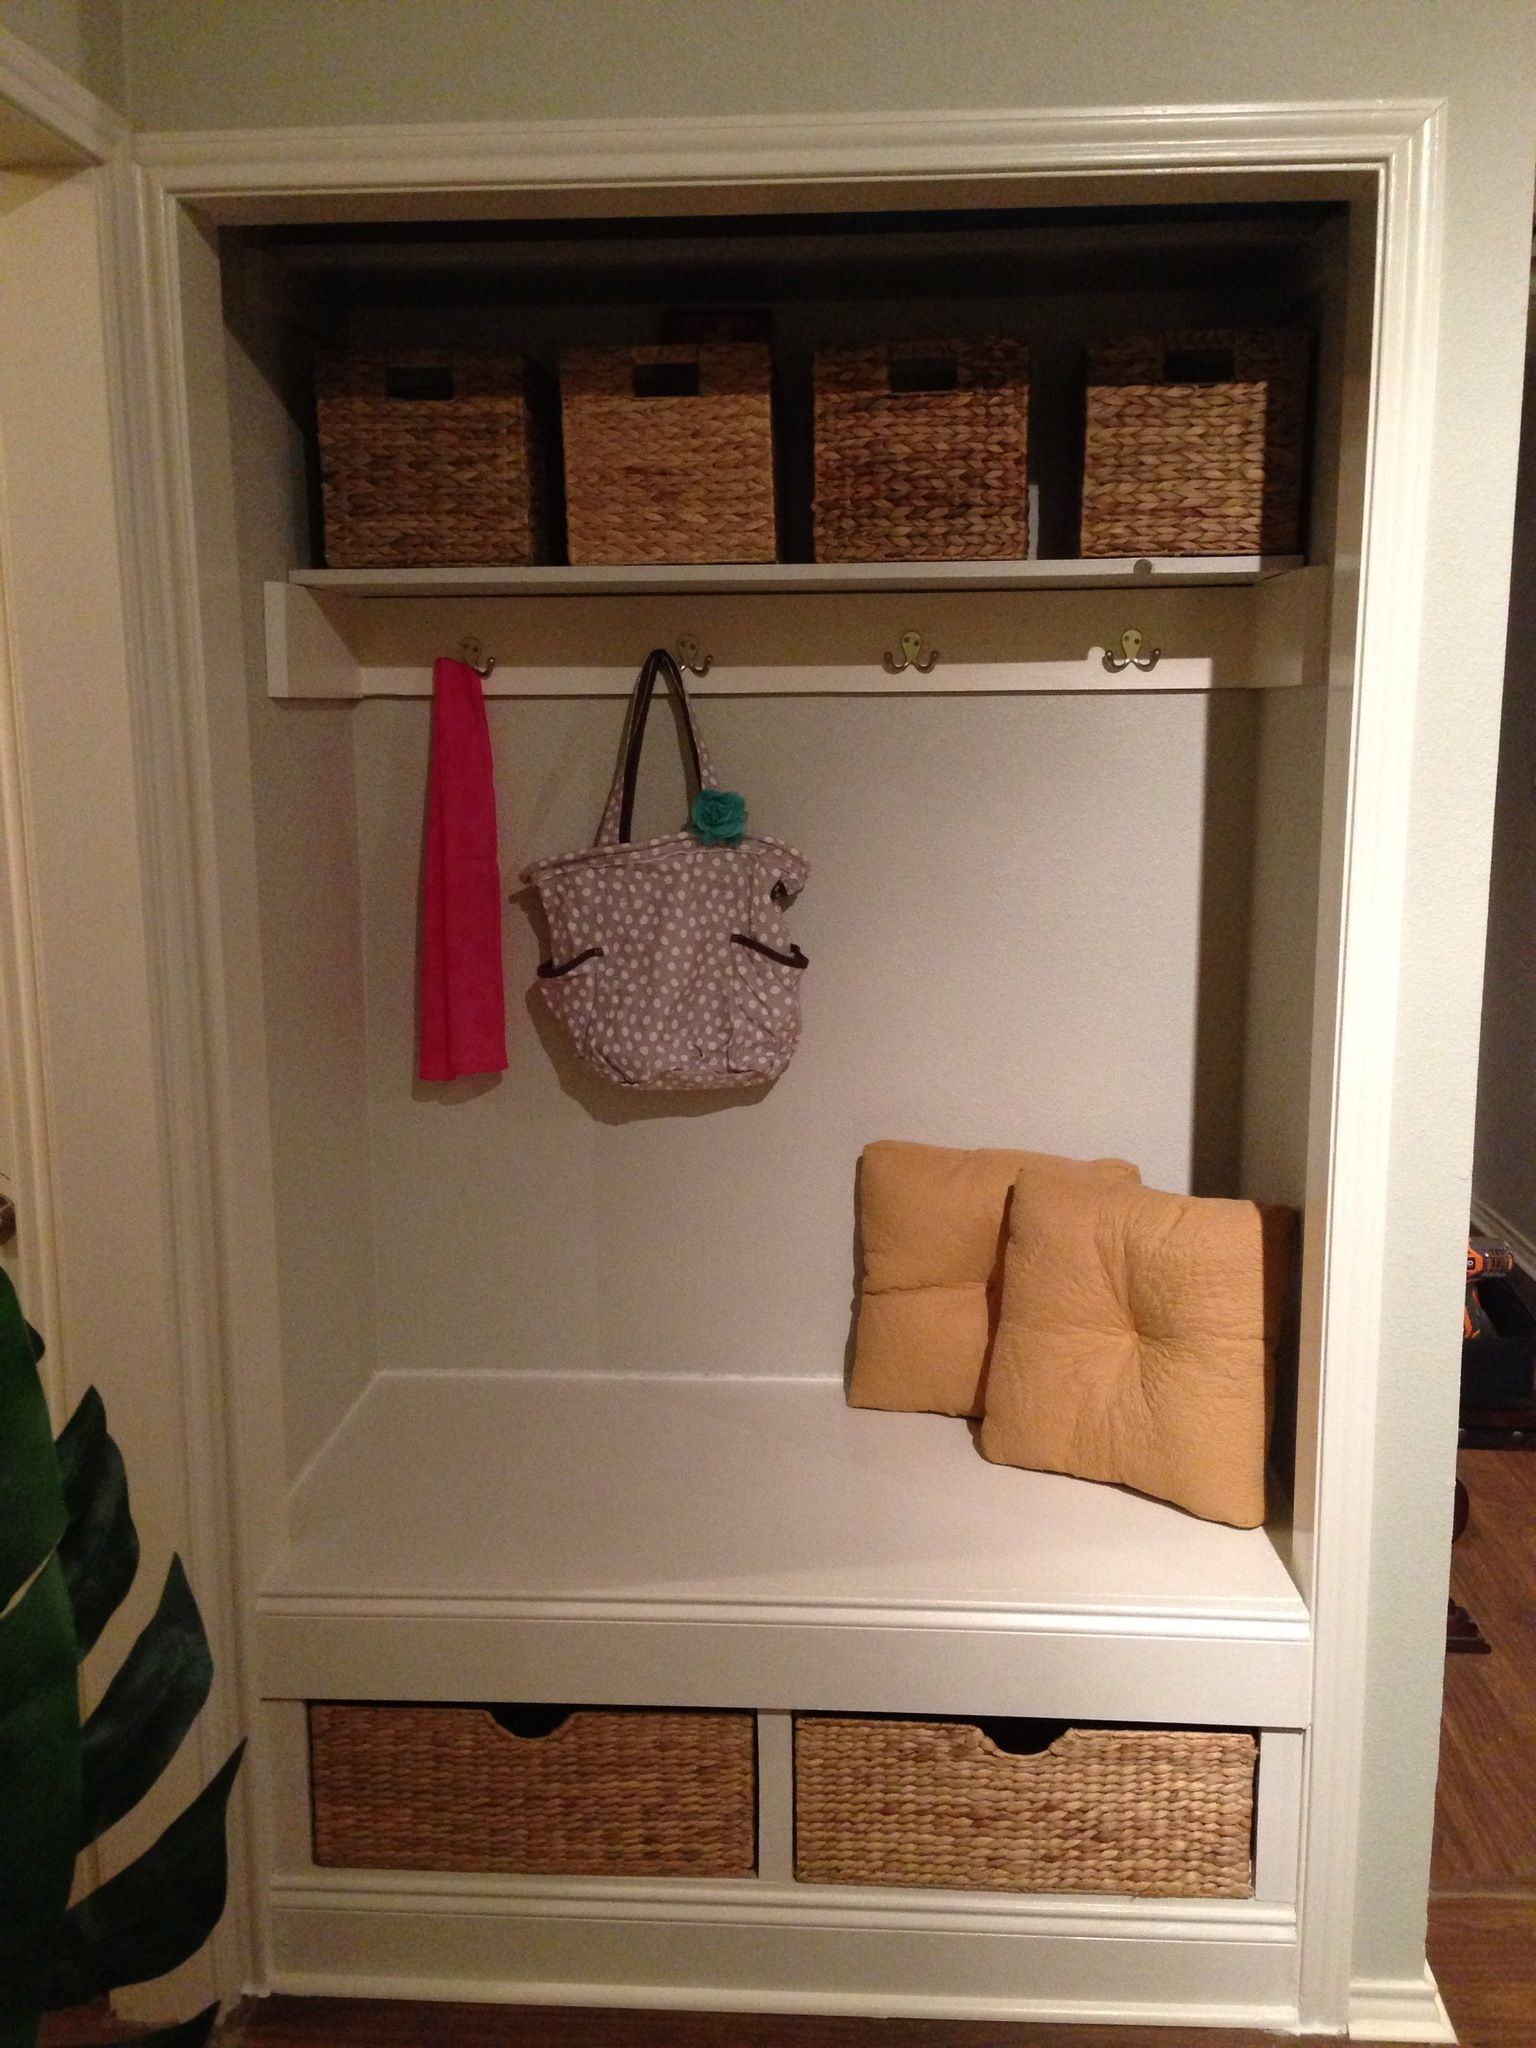 How to Transform a Closet Into a Nook. Maybe this is the solution to those horrible sliding closet doors in the front hallway